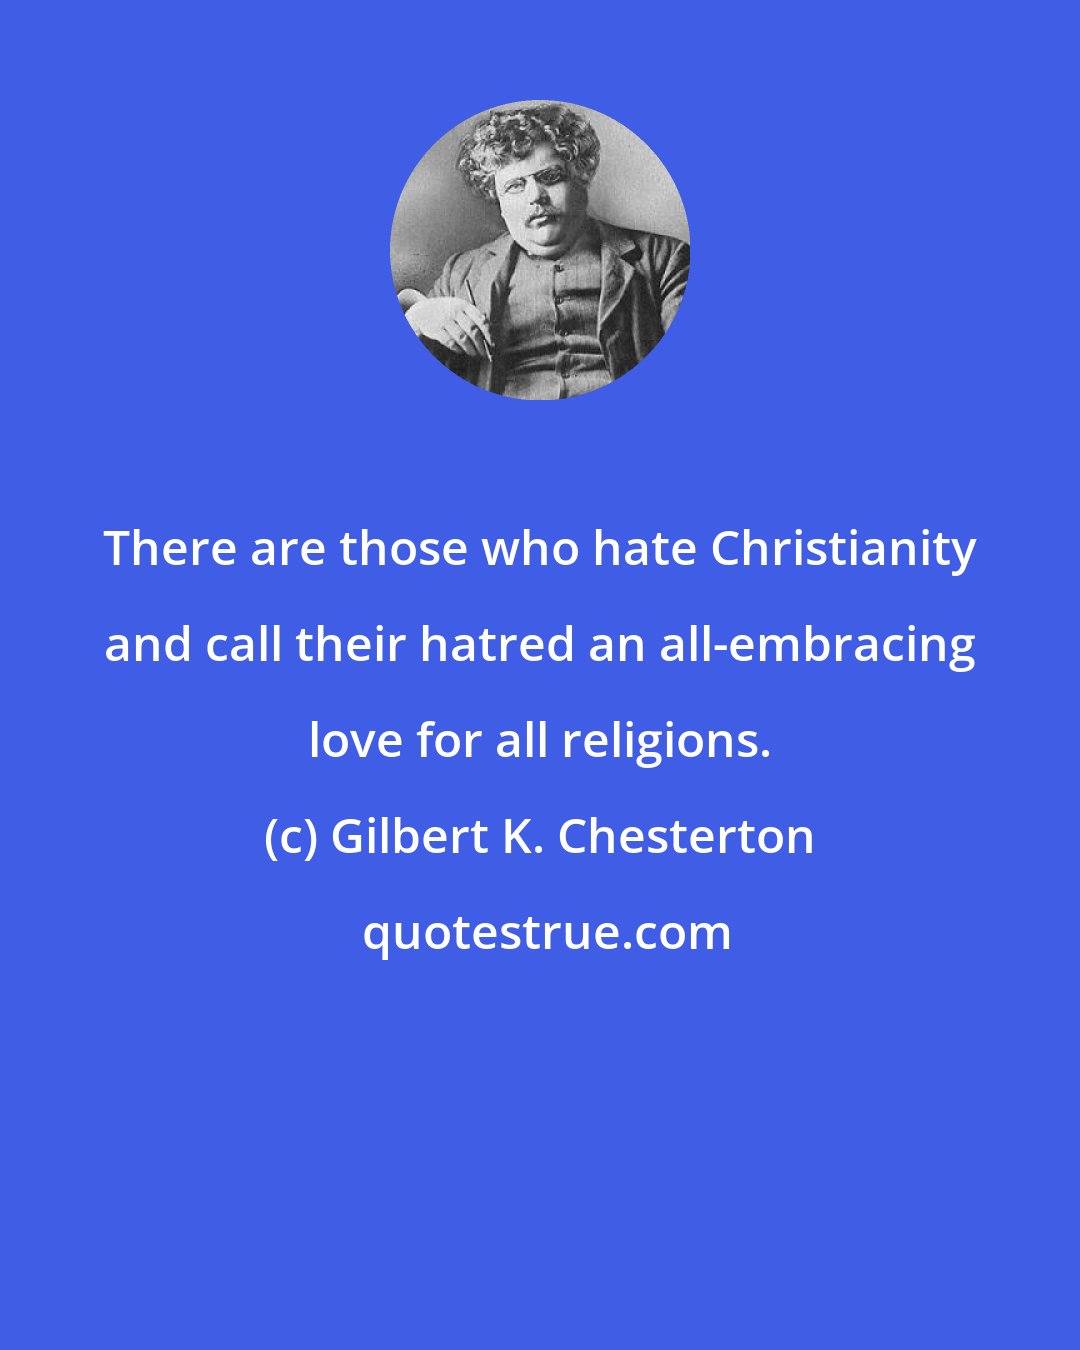 Gilbert K. Chesterton: There are those who hate Christianity and call their hatred an all-embracing love for all religions.